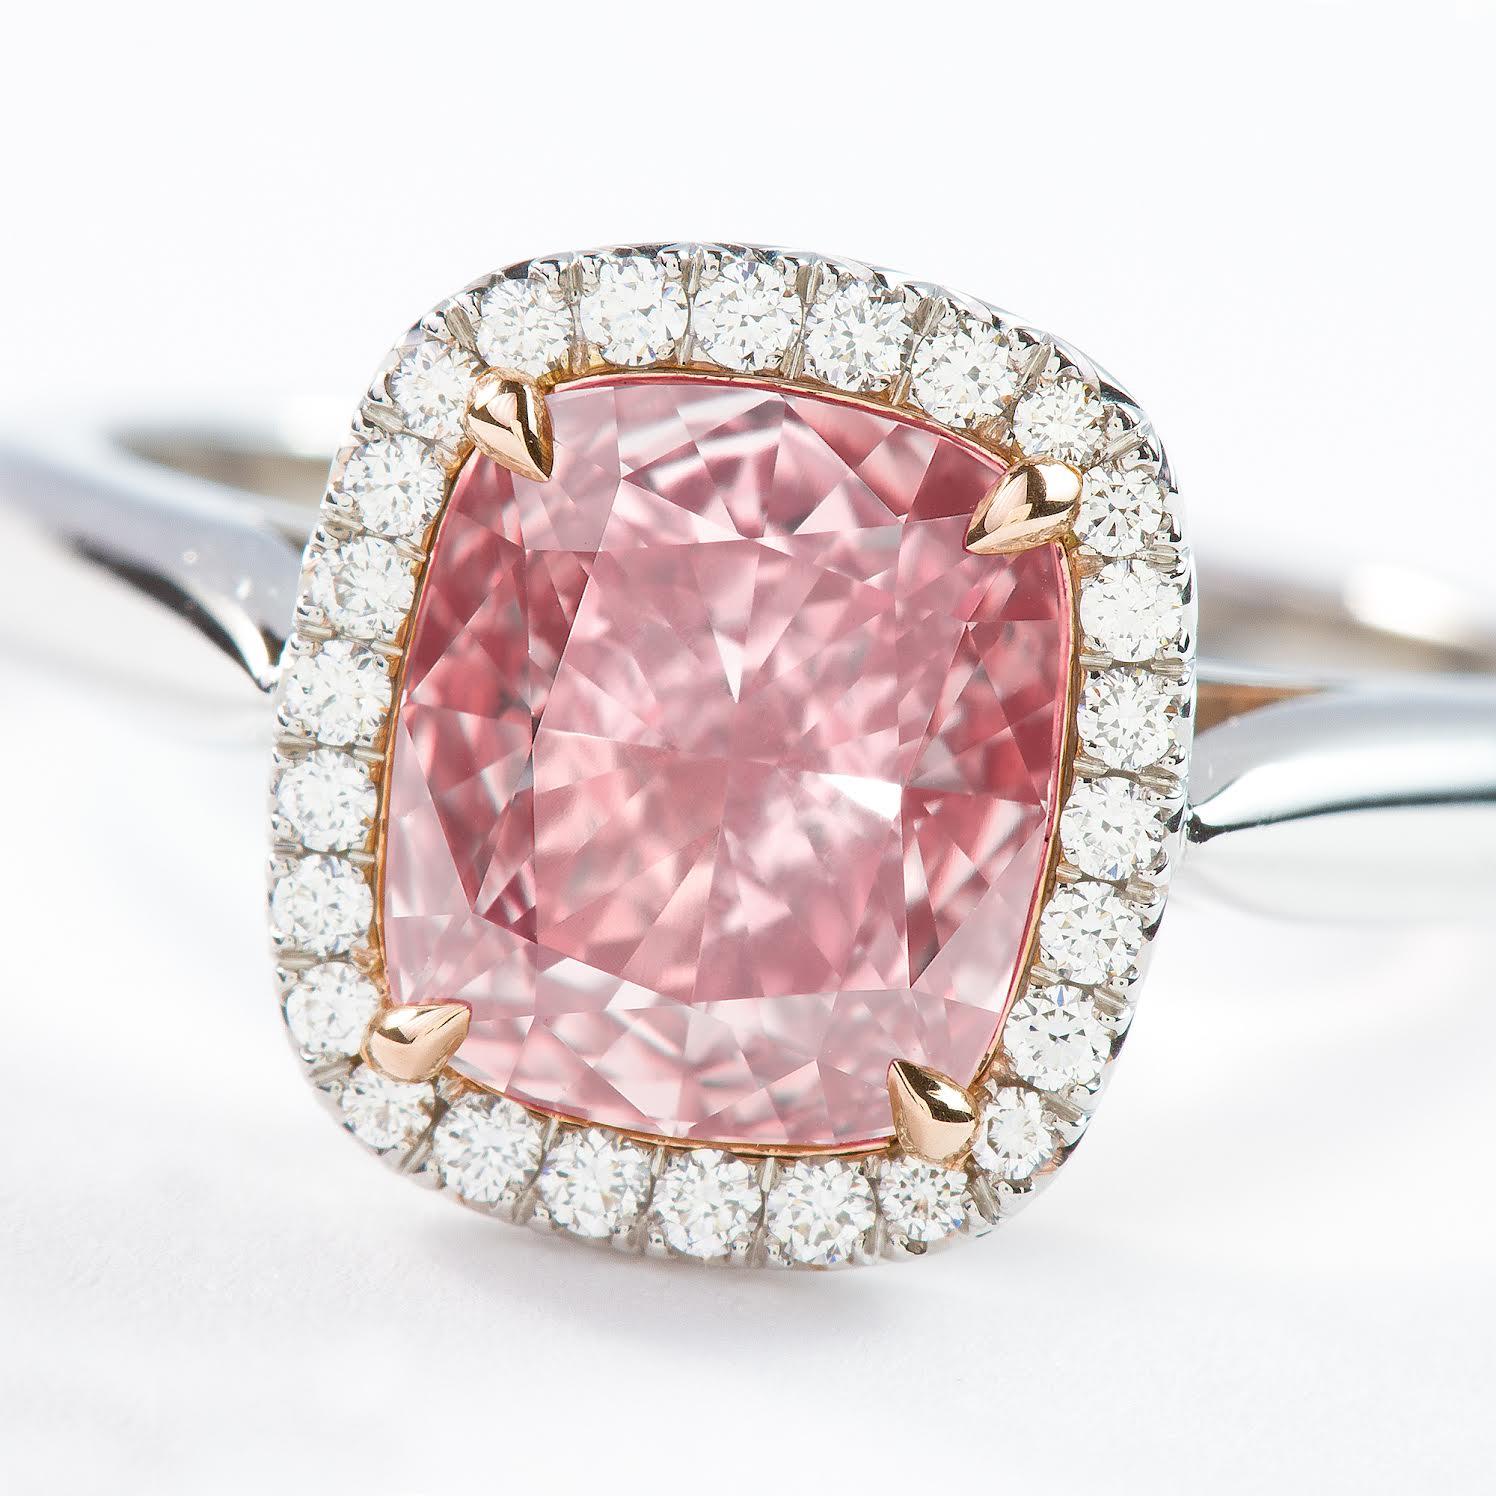 This beautiful natural color pink diamond from ISSAC NUSSBAUM NEW YORK weighs an impressive 2.02 carats and is a rare cushion shape stone with a  vs2 clarity fancy brown pink with pink being the predominant color . Set in hand made platnium and gold